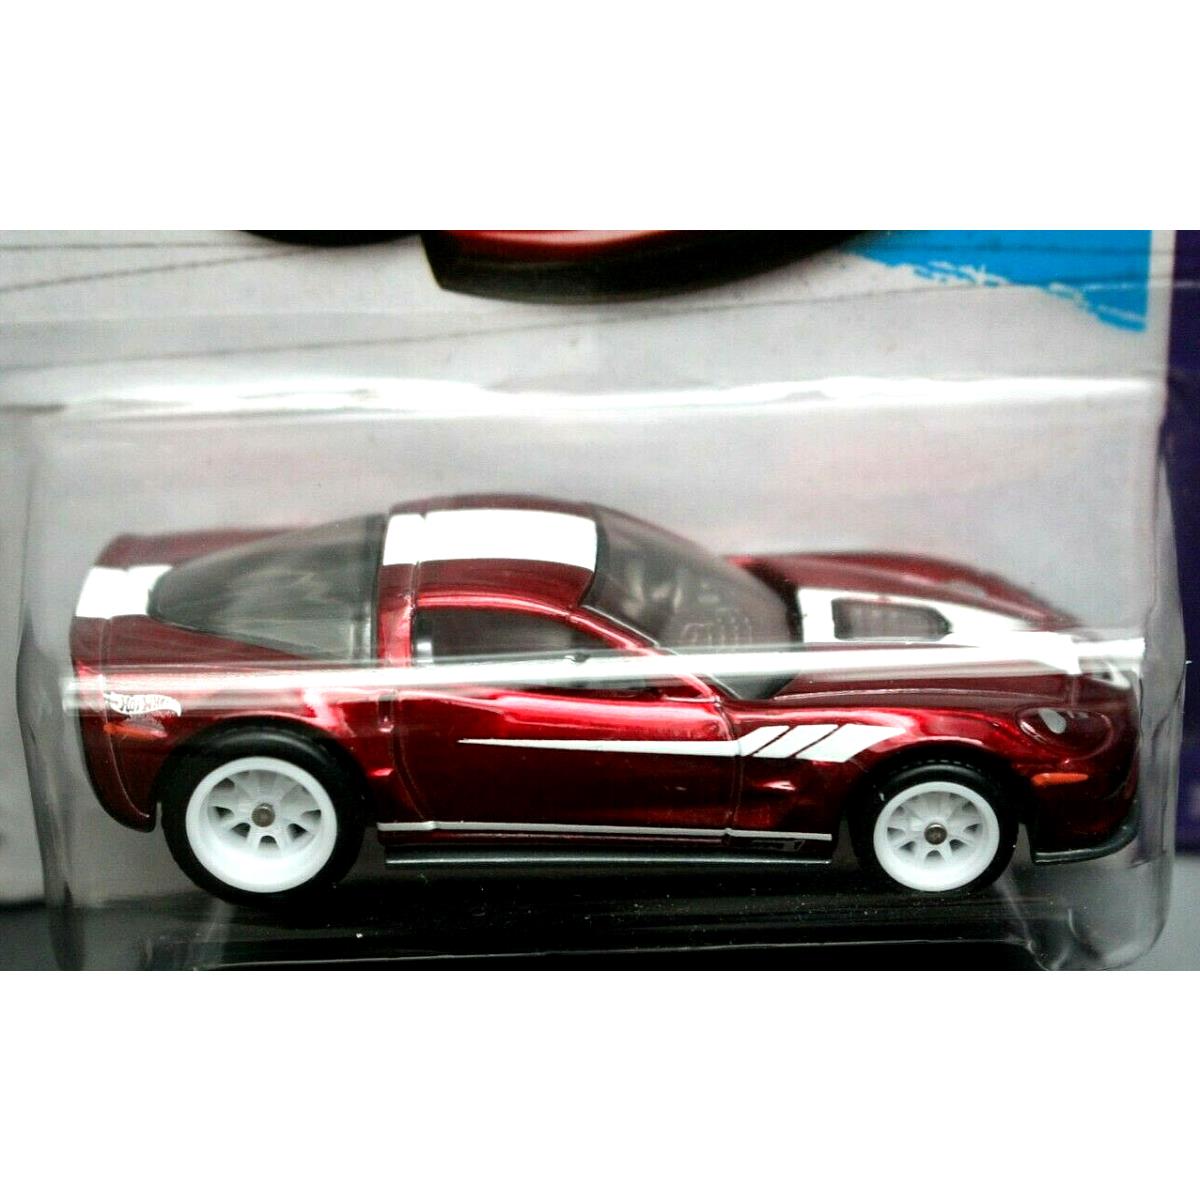 Hot Wheels toy Corvette - Red